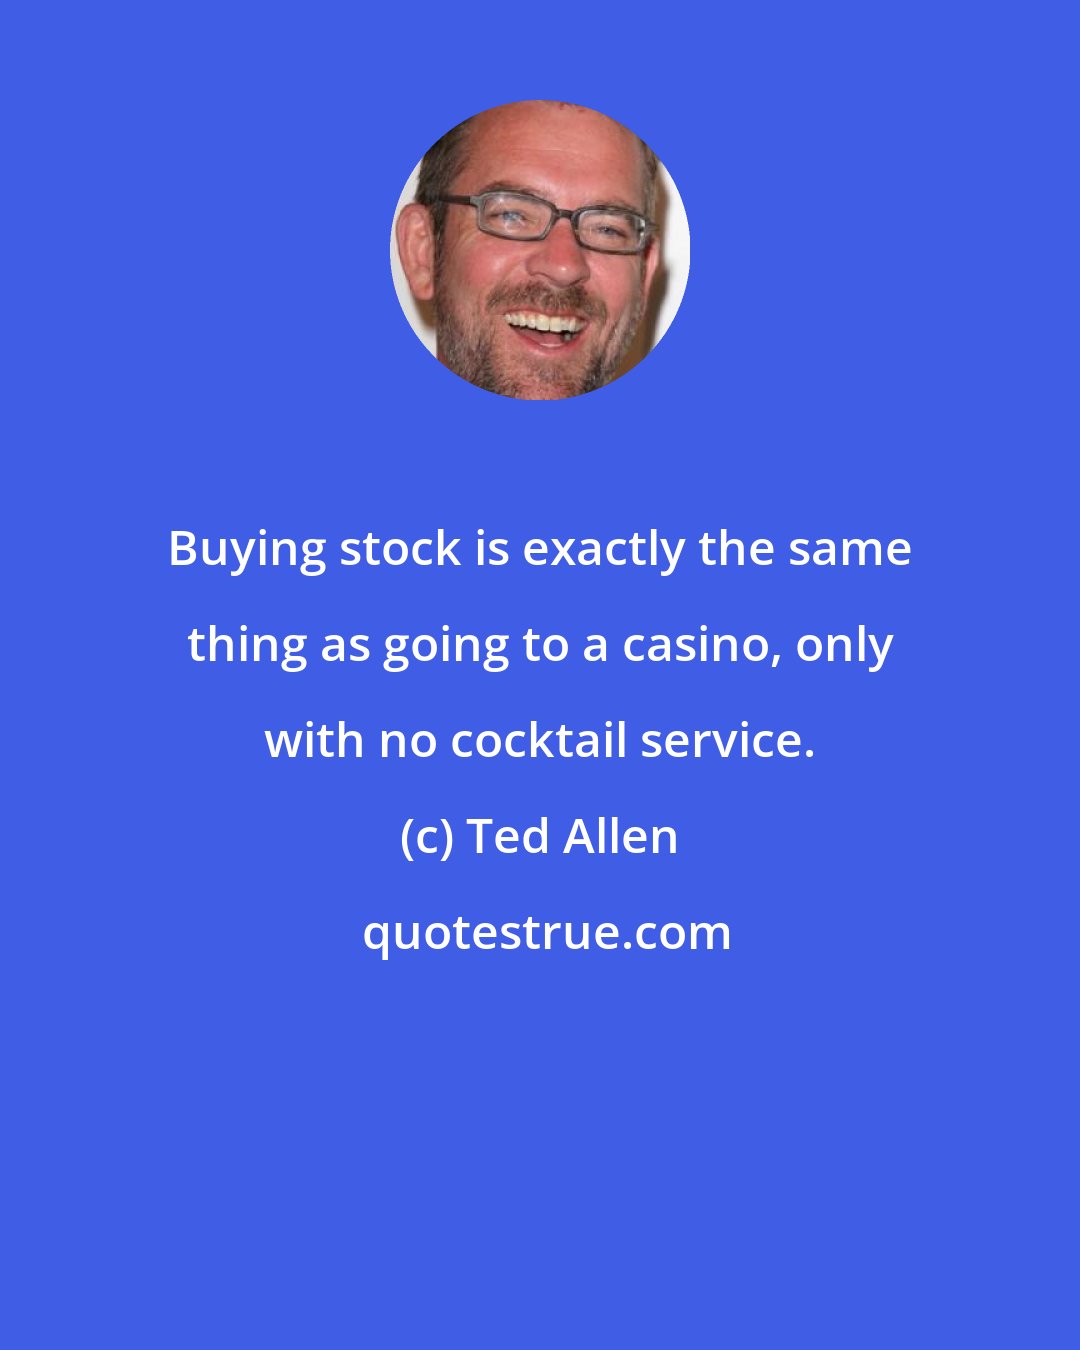 Ted Allen: Buying stock is exactly the same thing as going to a casino, only with no cocktail service.